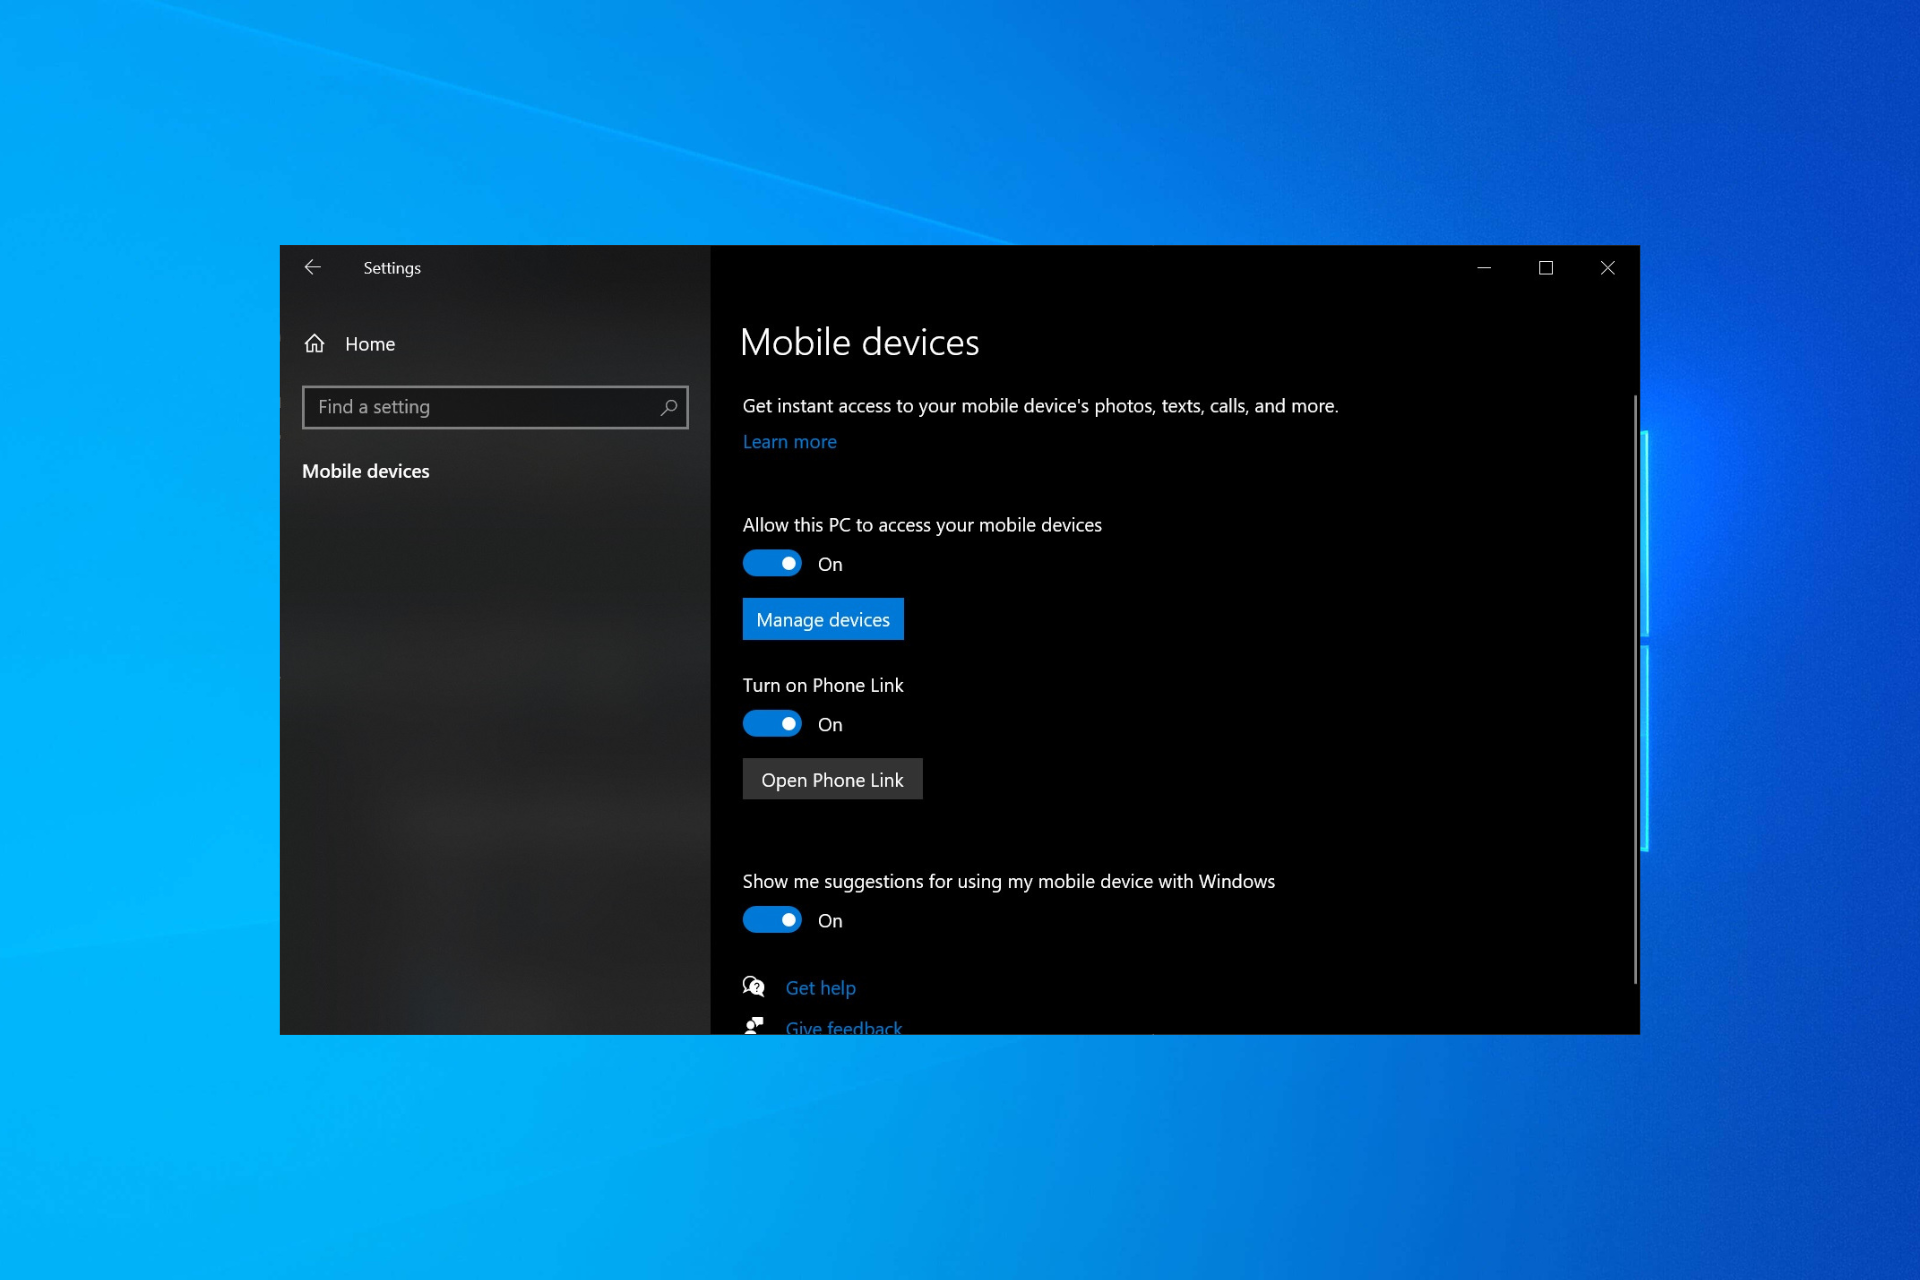 Mobile Devices feature on Windows 10 brings seamless Android integration